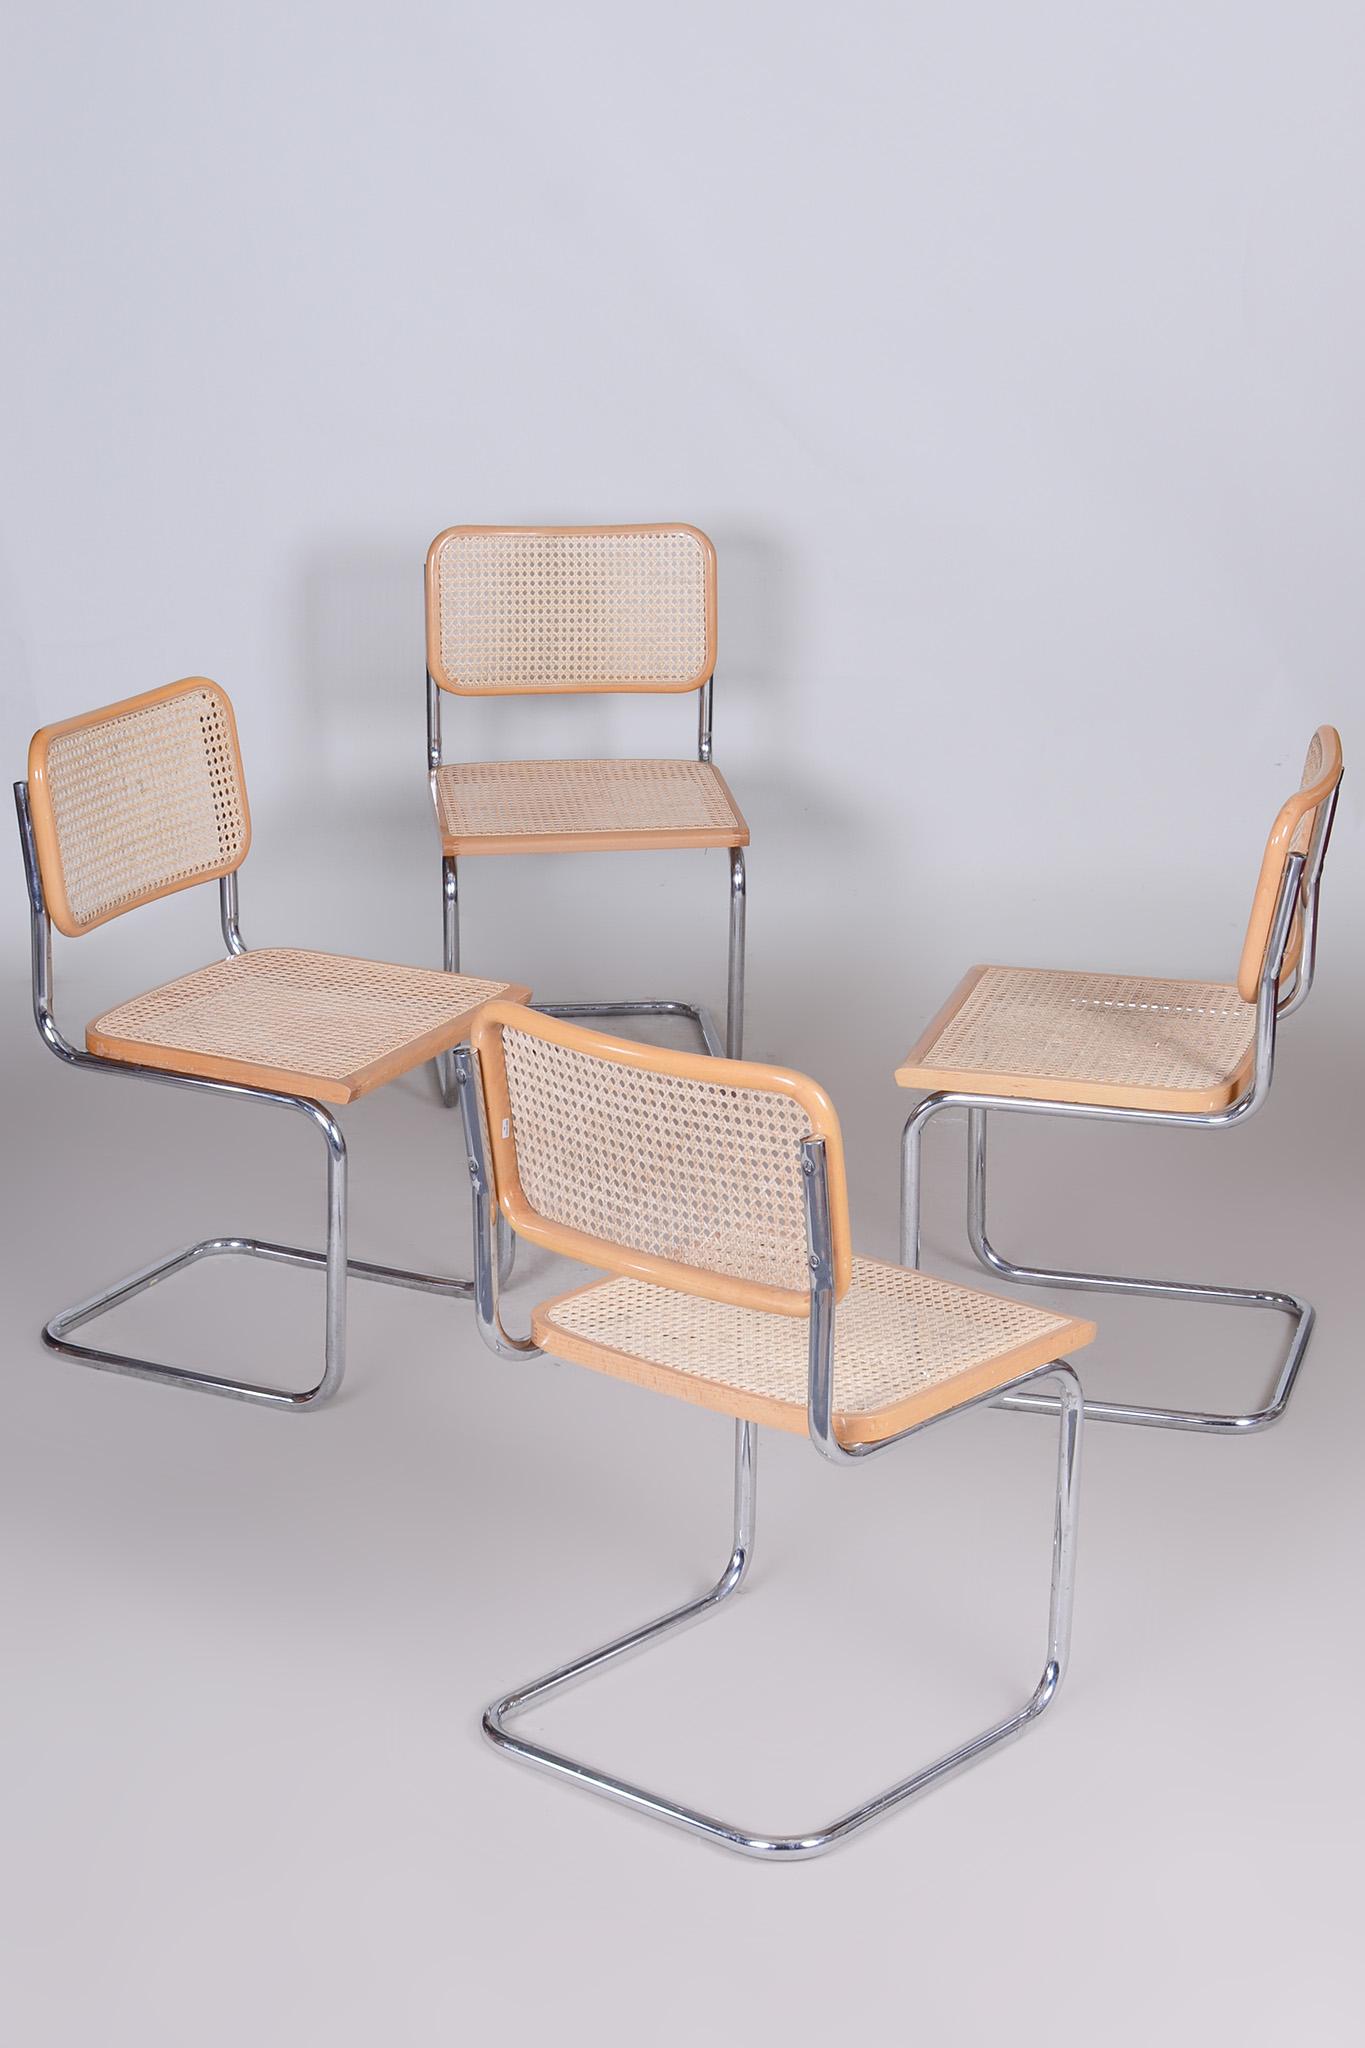 Set of Four Bauhaus Chairs, Chrome-Plated Steel, Rattan, Beech, Italy, 1960s For Sale 5